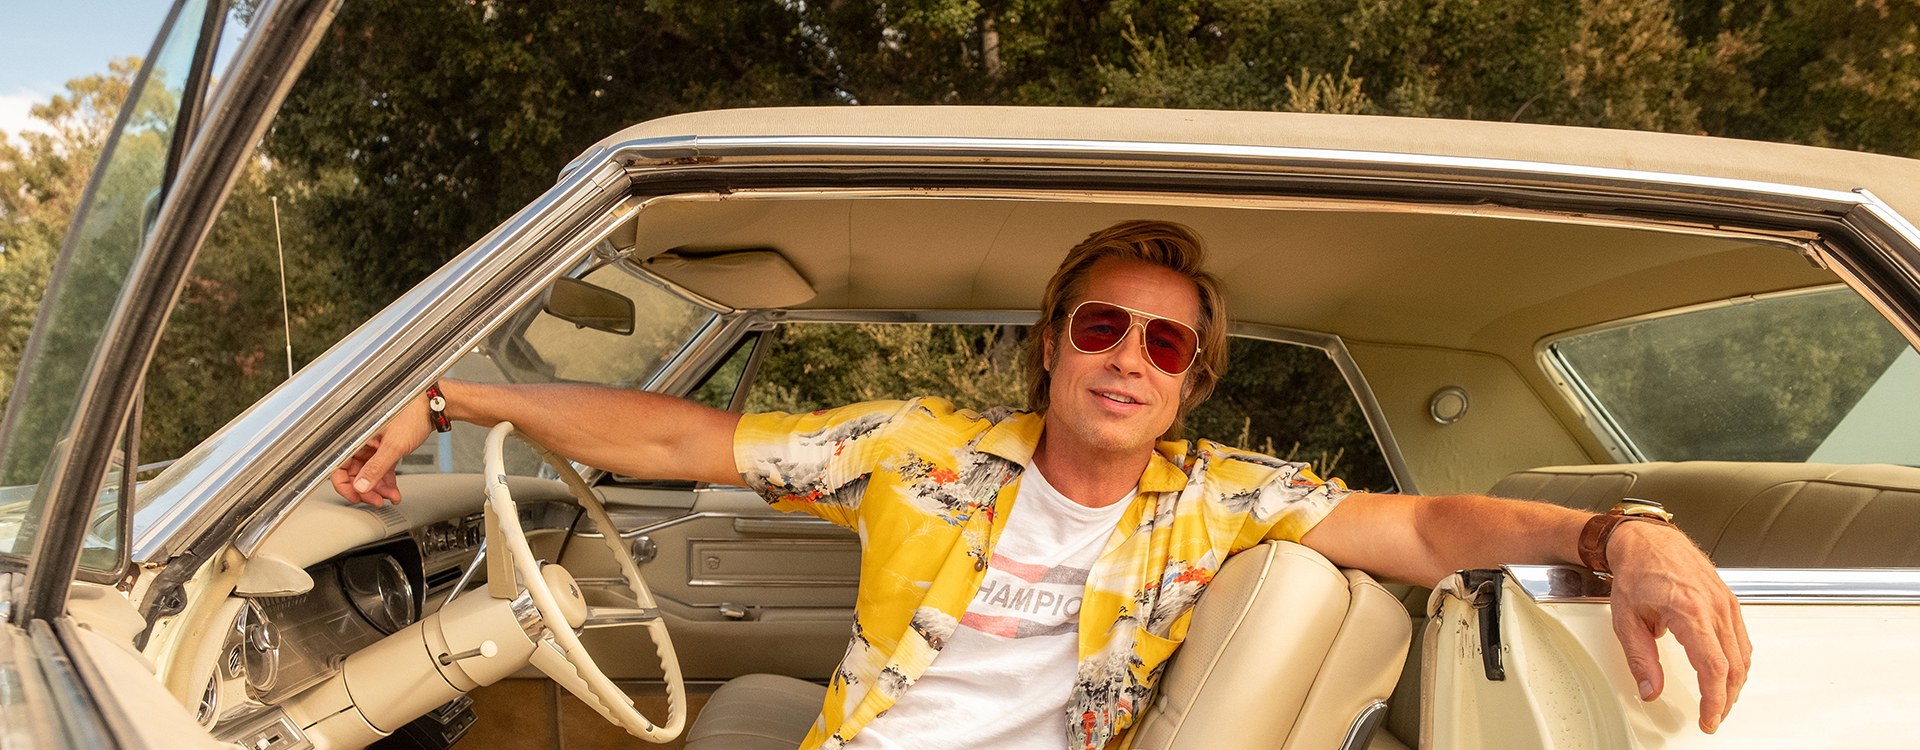 Brad Pitt - Once Upon a Time in Hollywood